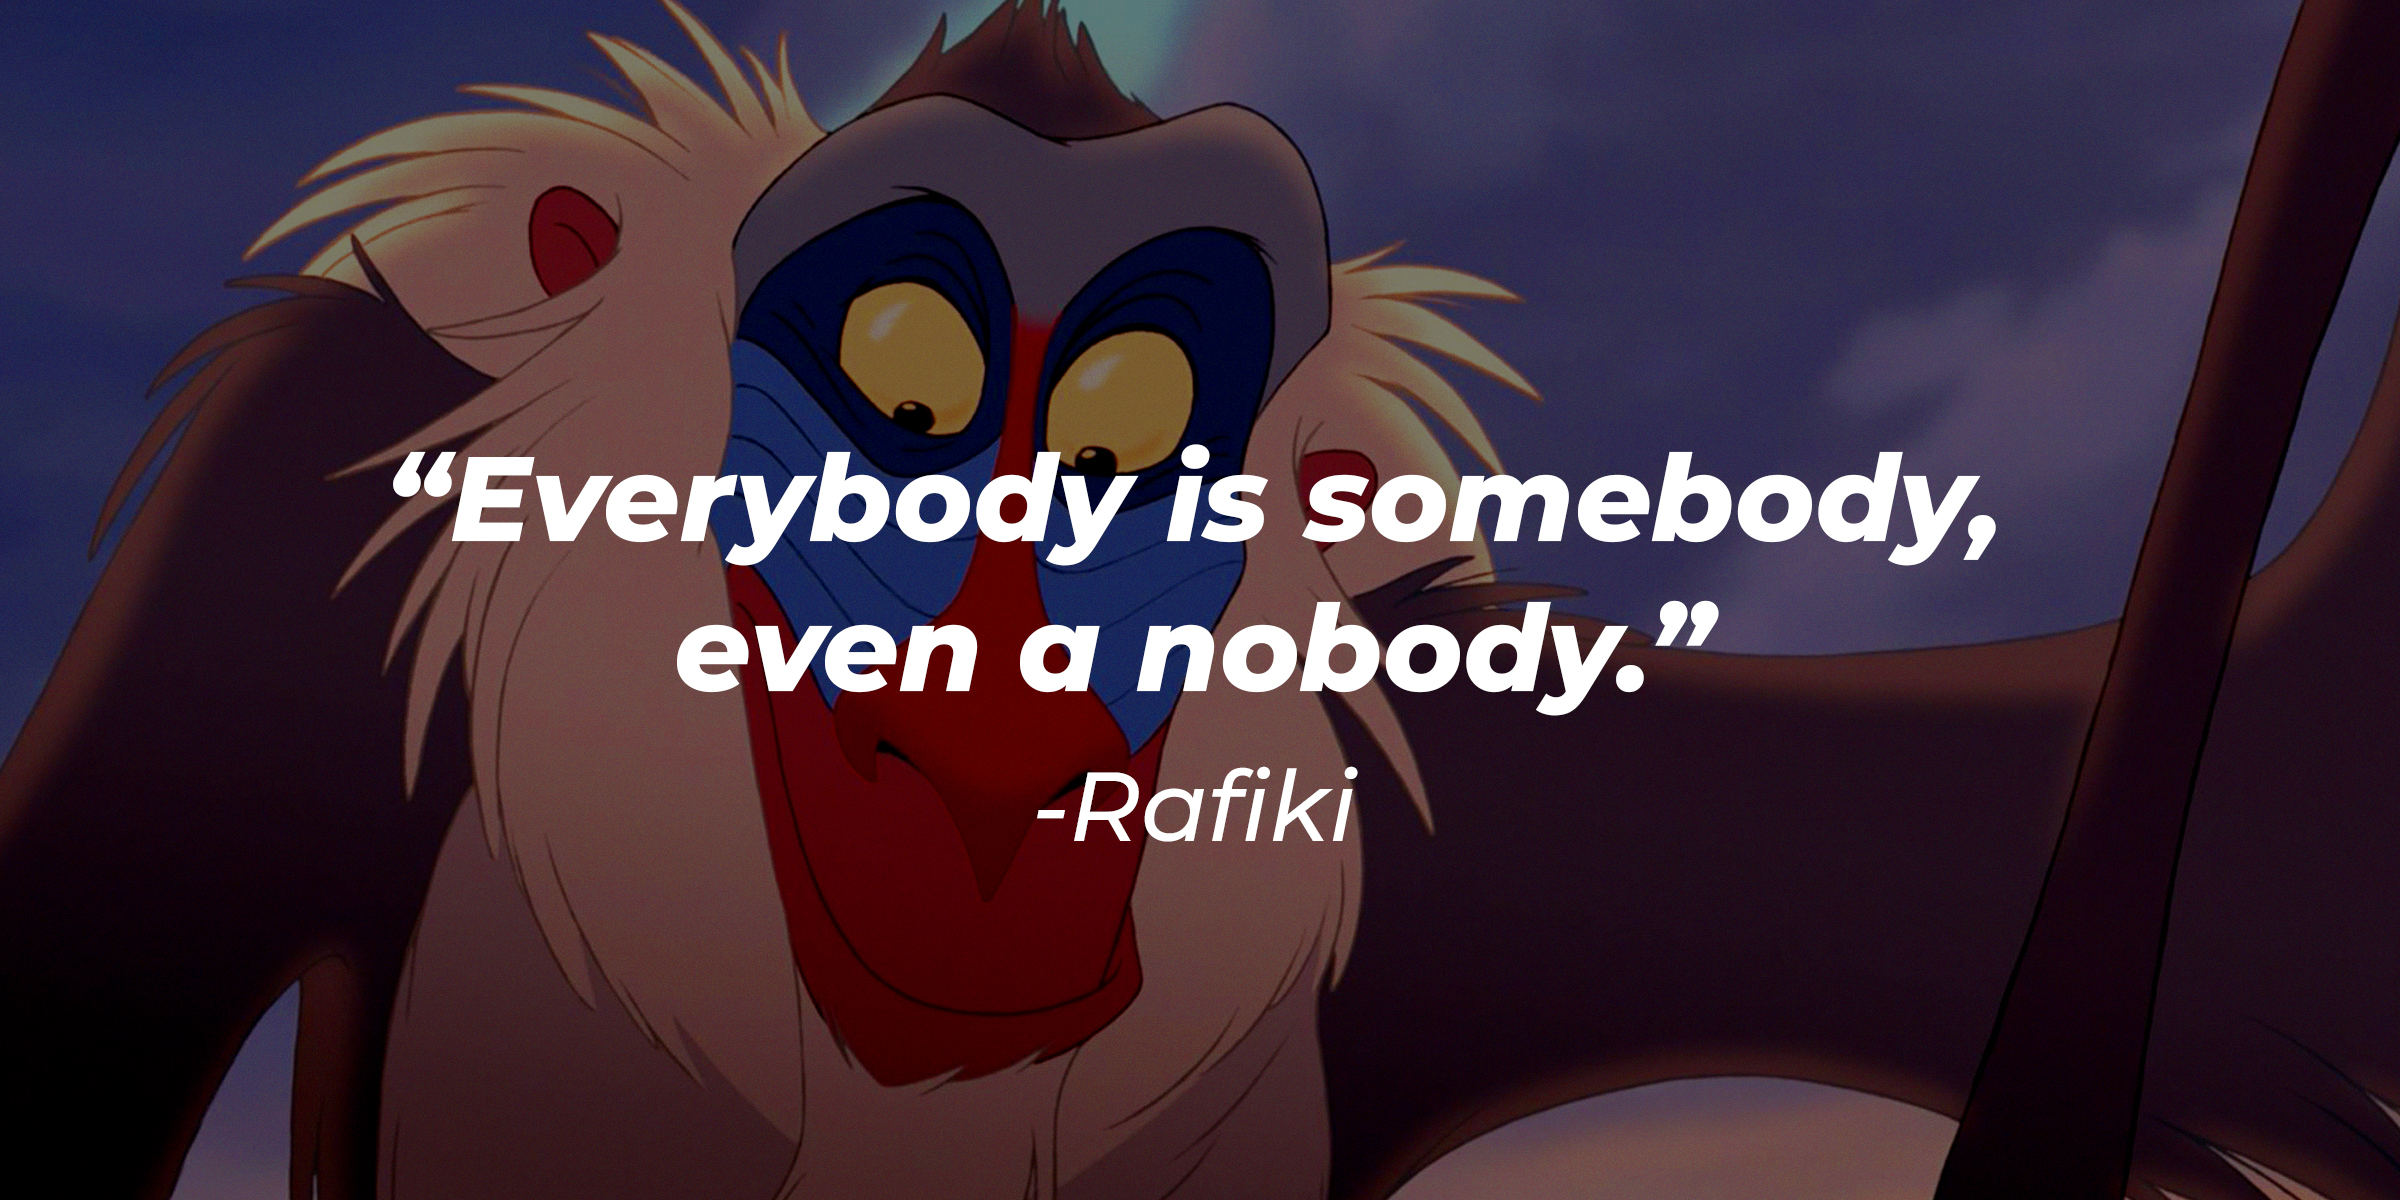 Rafiki's quote: "Everybody is somebody, even a nobody." | Source: Facebook/DisneyTheLionKing